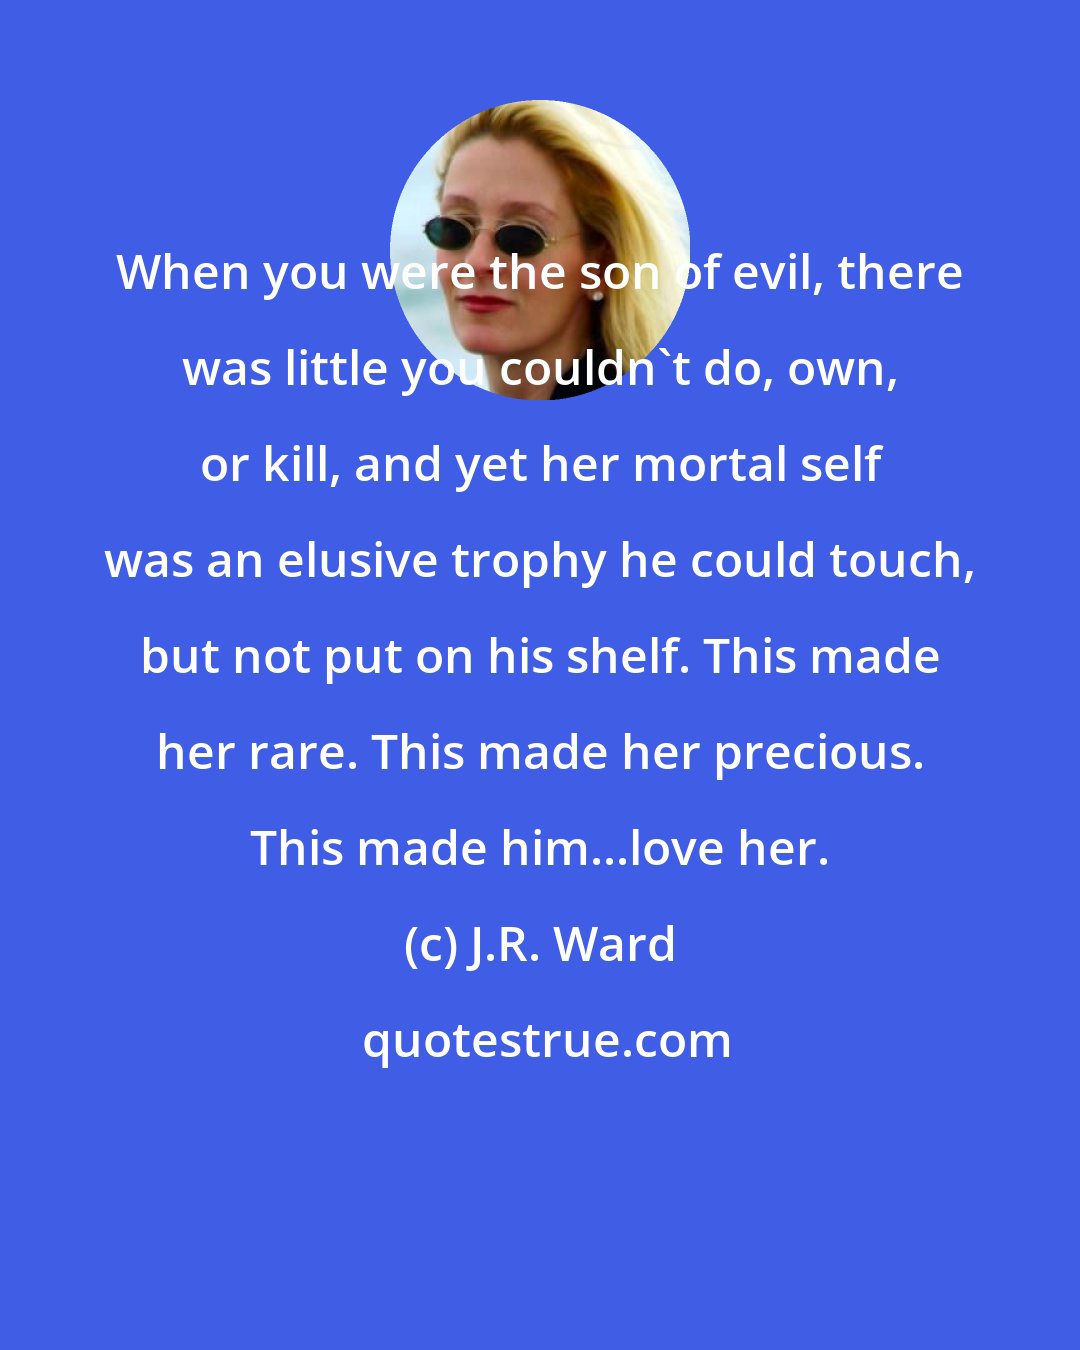 J.R. Ward: When you were the son of evil, there was little you couldn't do, own, or kill, and yet her mortal self was an elusive trophy he could touch, but not put on his shelf. This made her rare. This made her precious. This made him...love her.